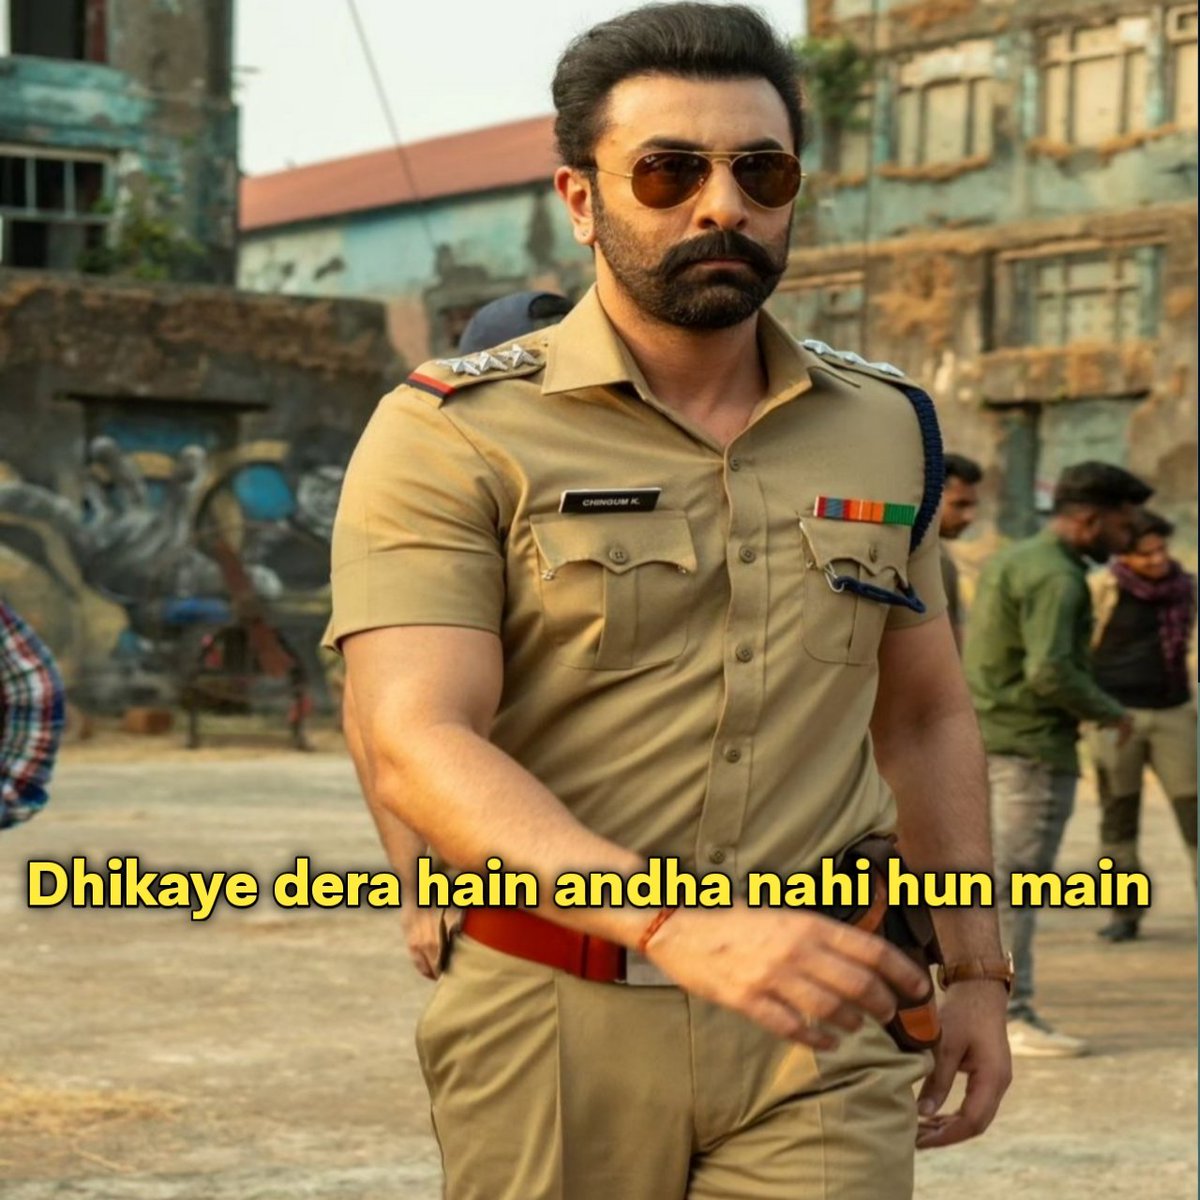 Sir see I have all legal documents please don't punish me 
Ranveer Kapoor as a PoliceOfficer :